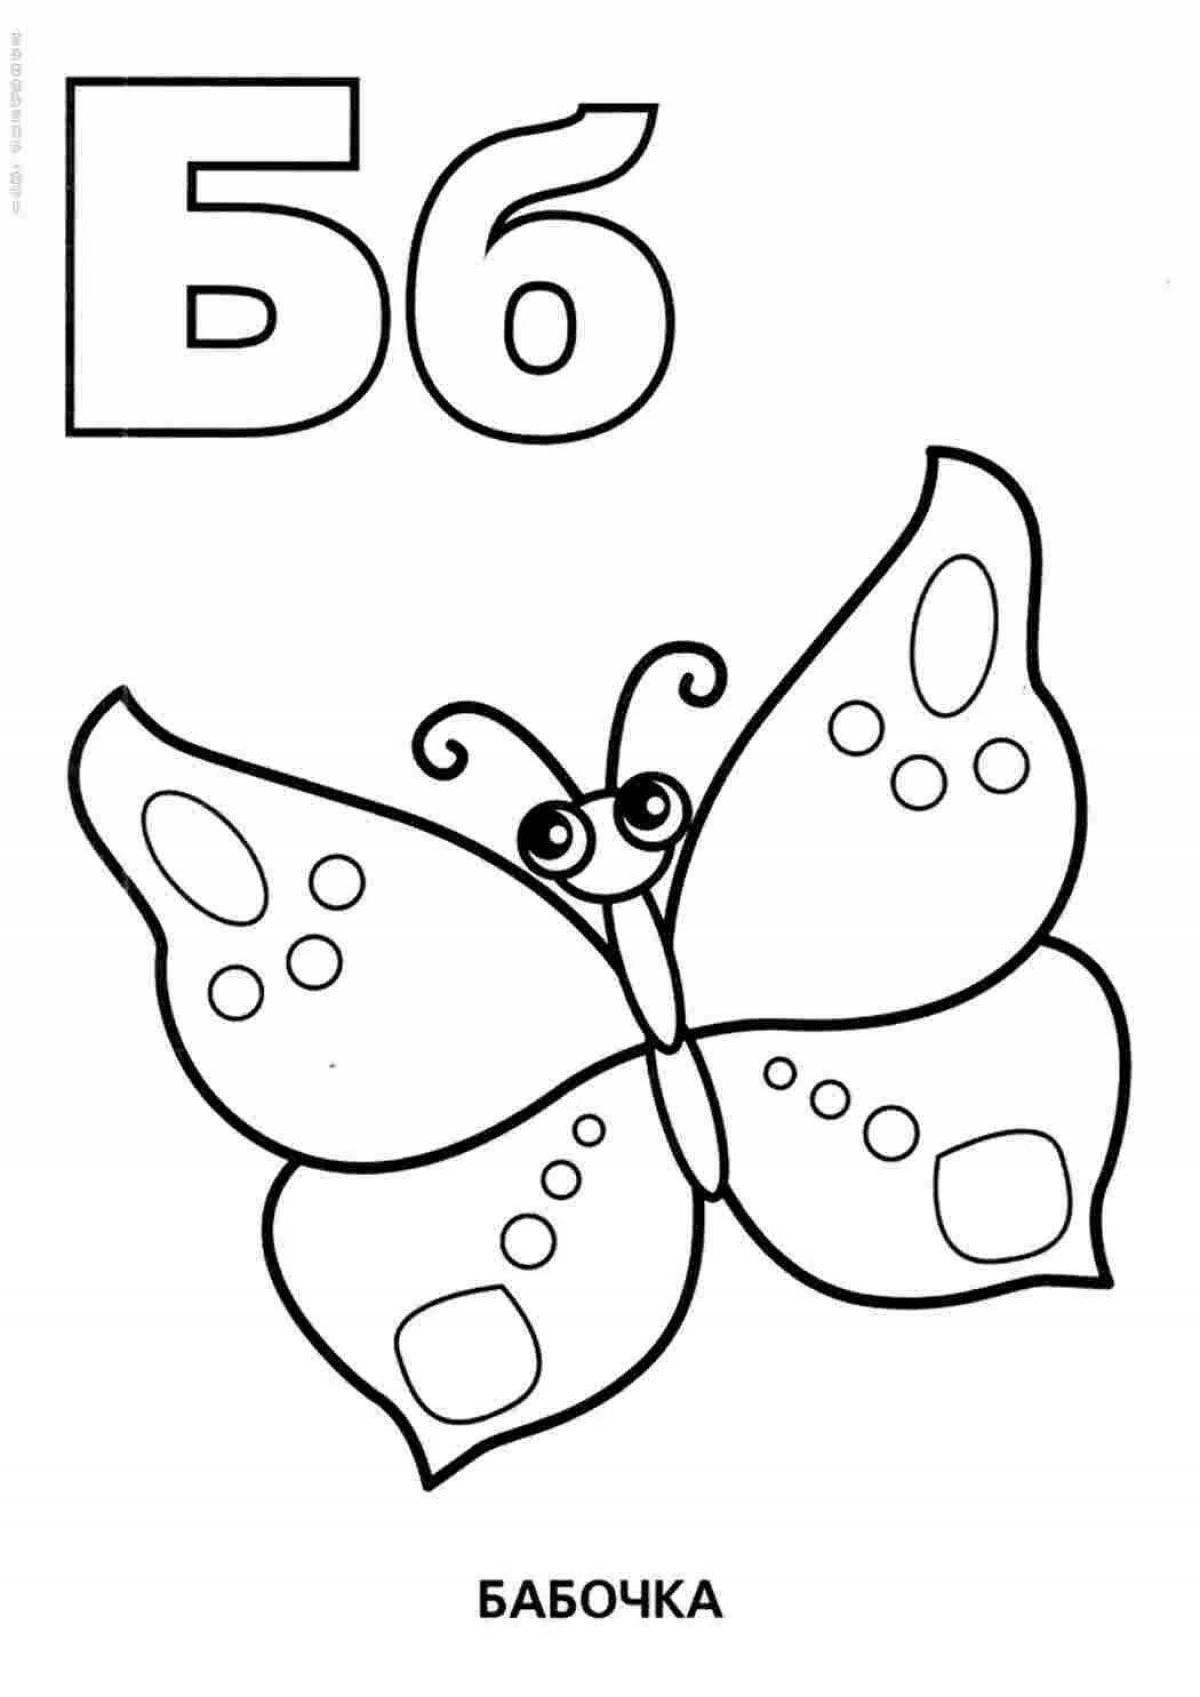 A wonderful coloring book for girls with letters